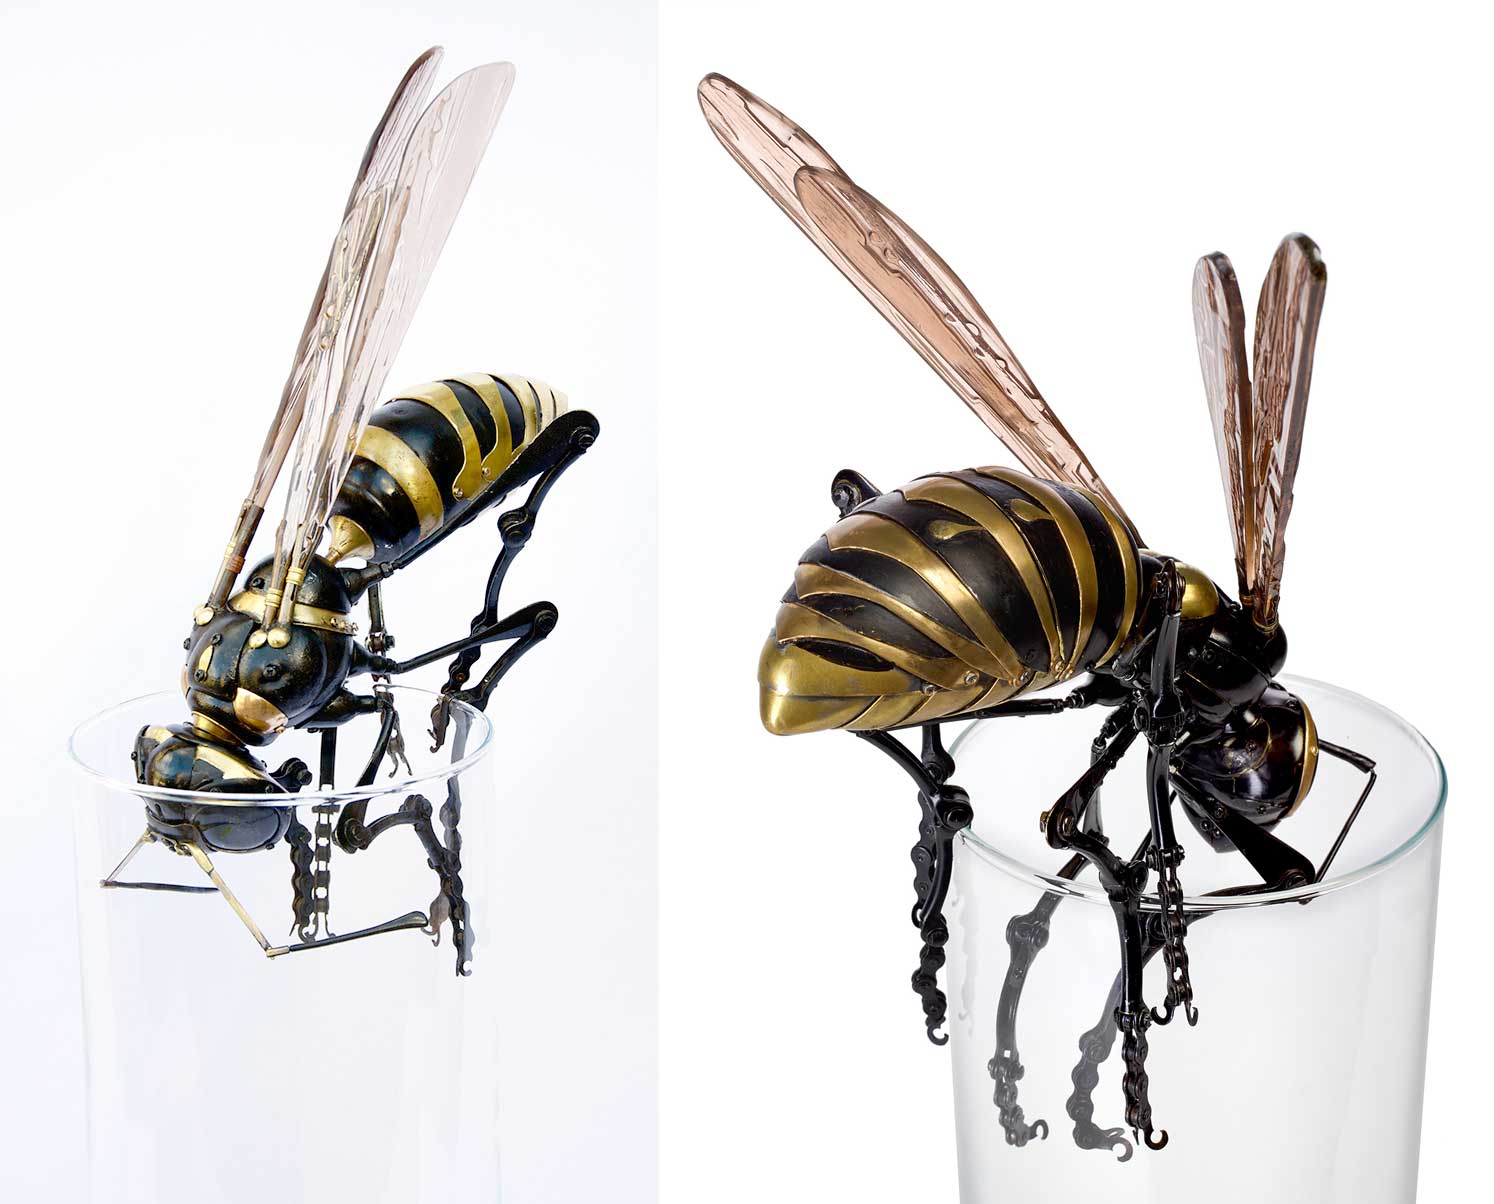 "Wasp" 2013, Edouard Martinent. Abdomen: steel tips for boots, bike headlights. Thorax and head: steel tips and bells from bikes and typewriters. Eyes: vintage watch case. Antennae: spectacles arms. Legs: bike brakes, bike chain, spoon handles. Wings: glass.